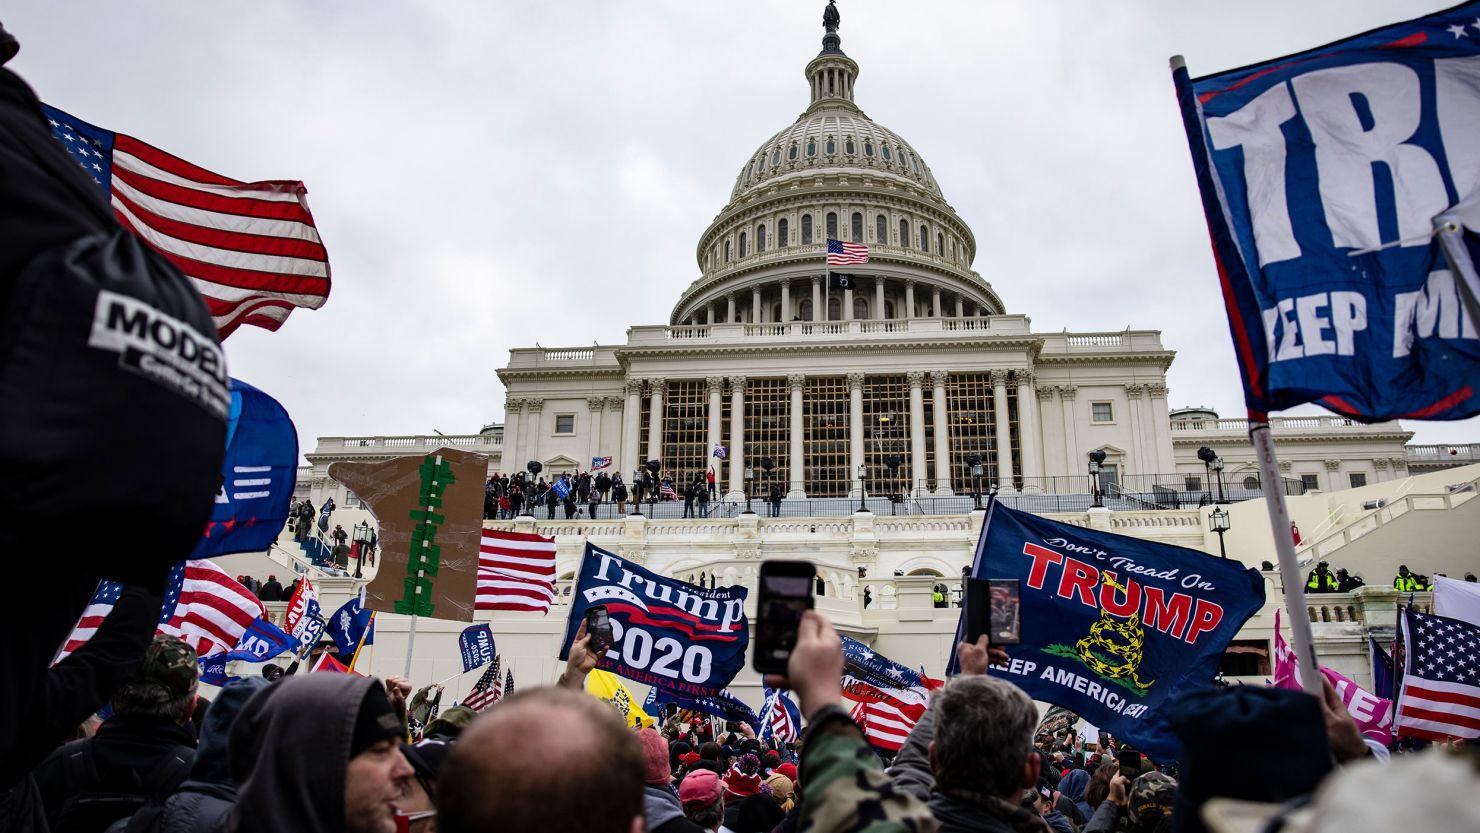 WASHINGTON, DC - JANUARY 06: Pro-Trump supporters storm the U.S. Capitol following a rally with President Donald Trump on January 6, 2021 in Washington, DC. Trump supporters gathered in the nation's capital today to protest the ratification of President-elect Joe Biden's Electoral College victory over President Trump in the 2020 election. 